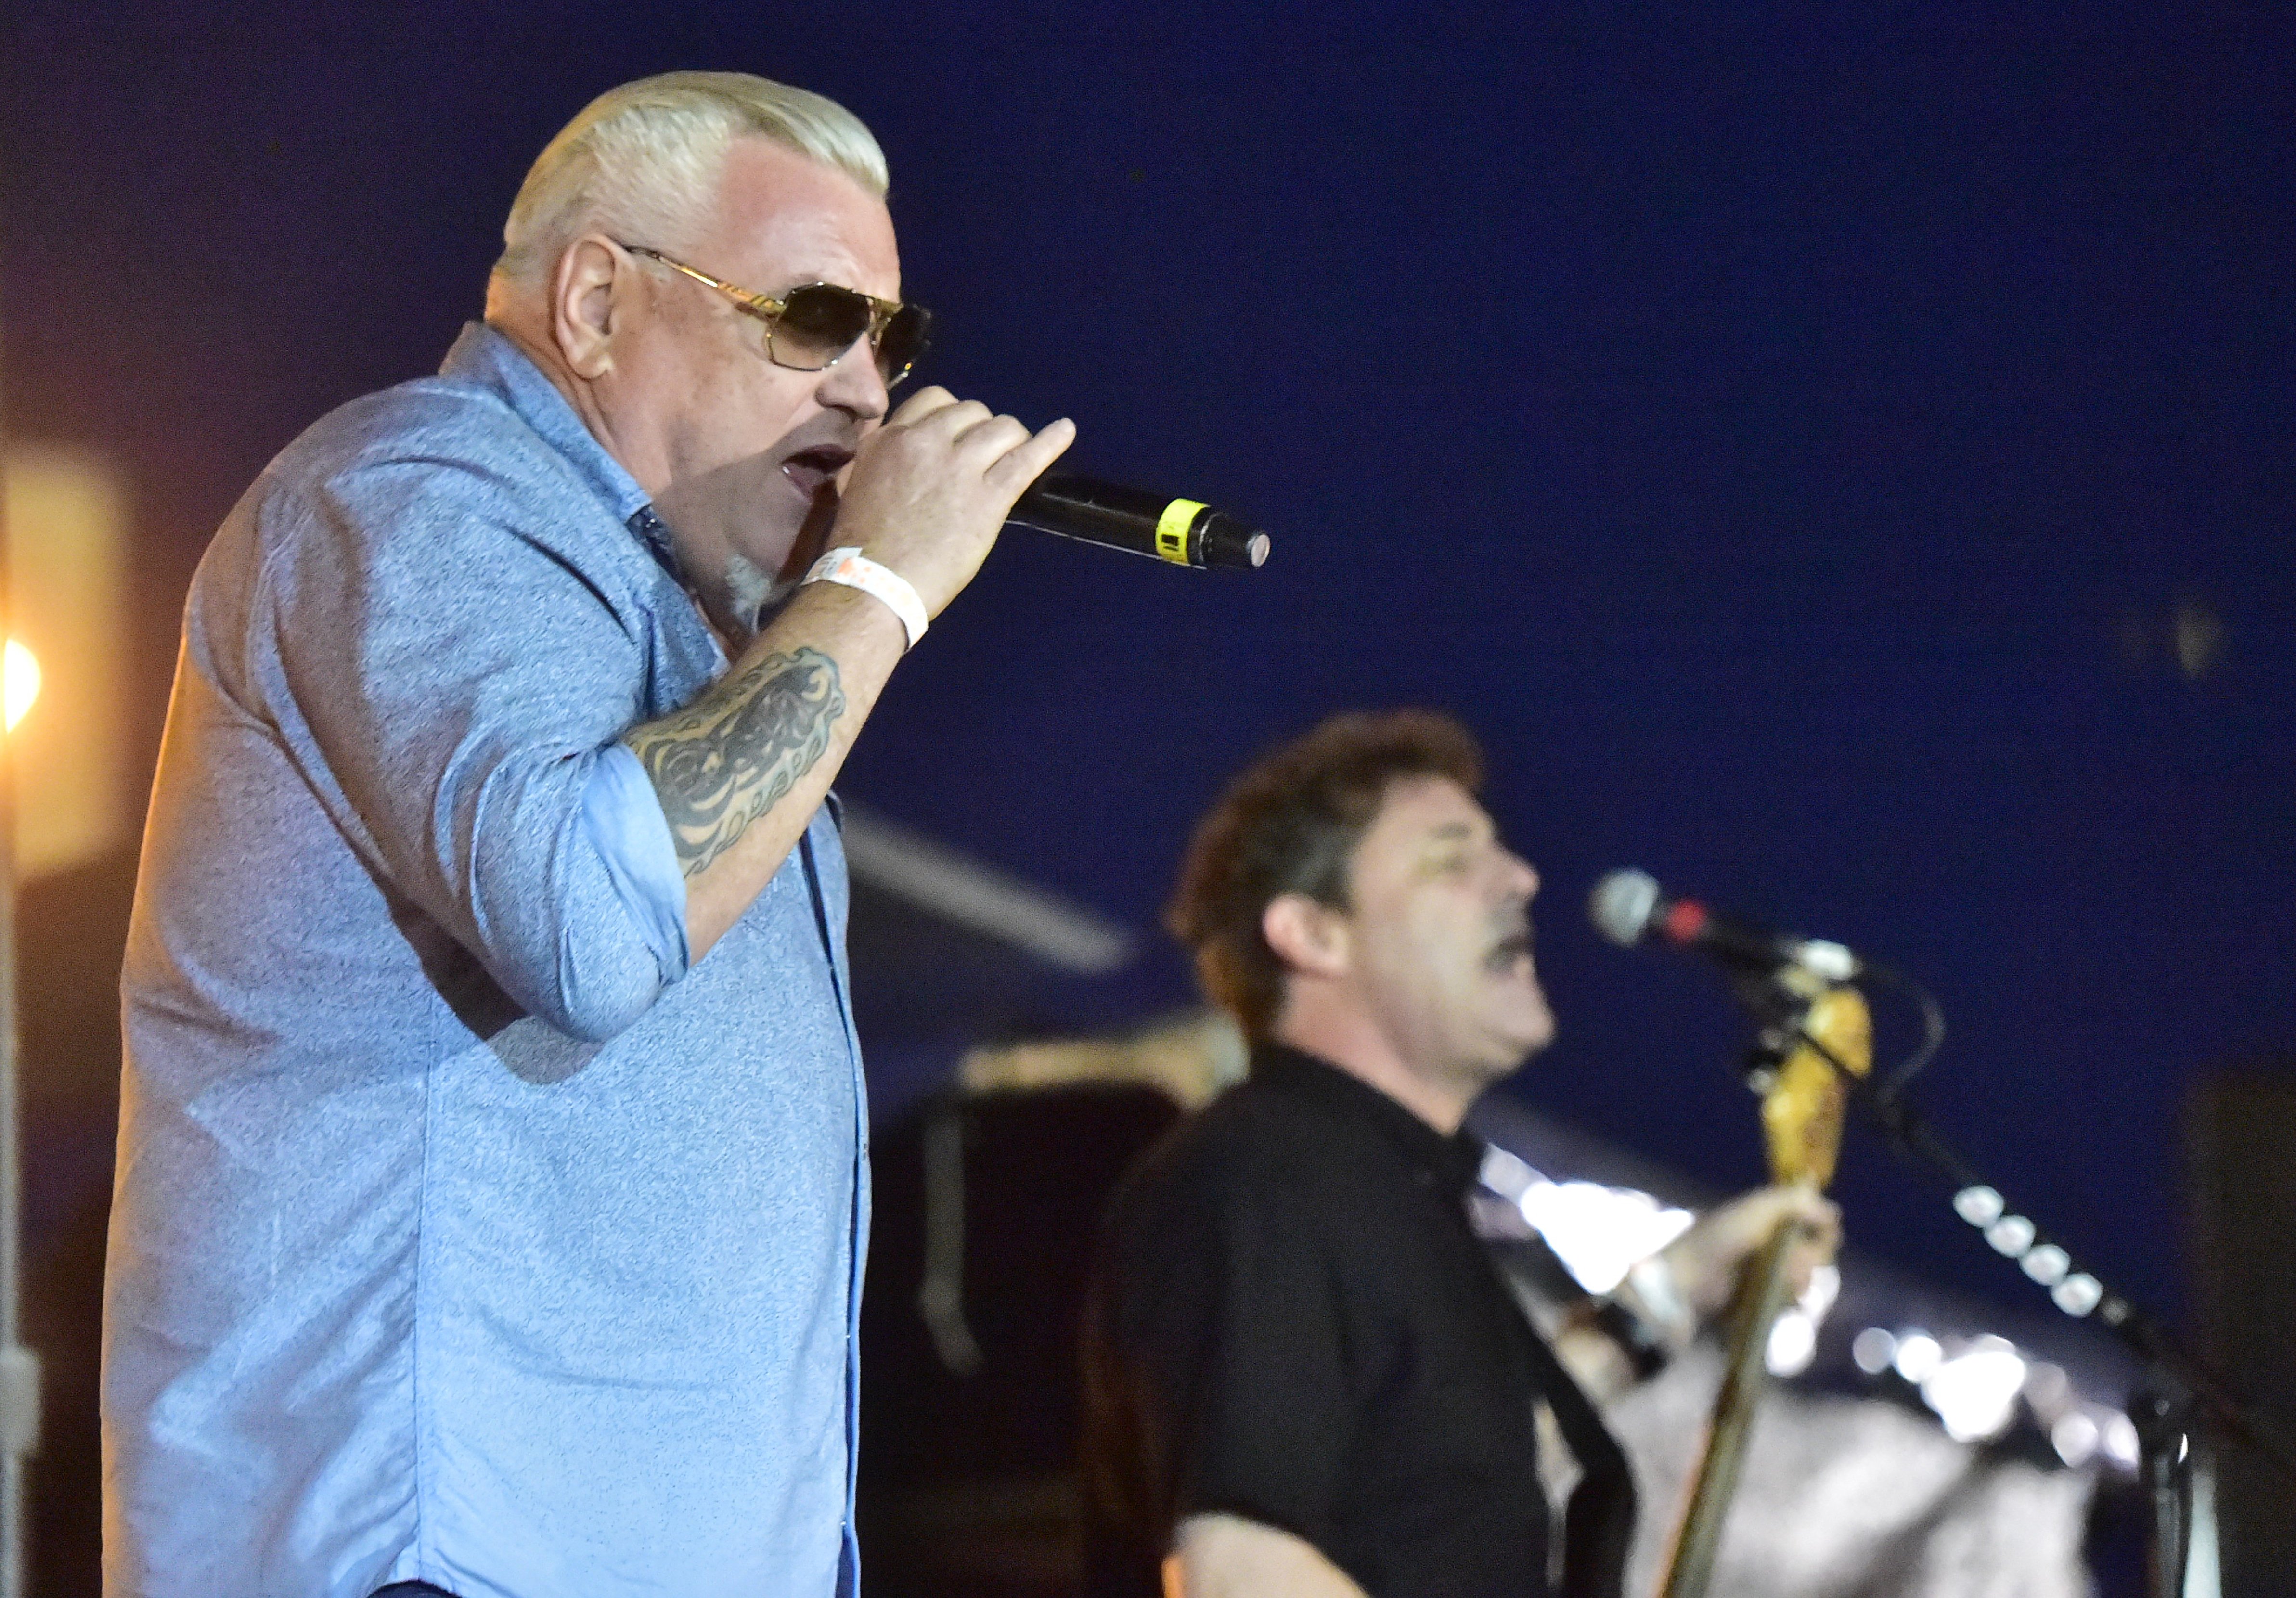 Smash Mouth Singer Steve Harwell Retiring Due to Health Issues After  Chaotic Show